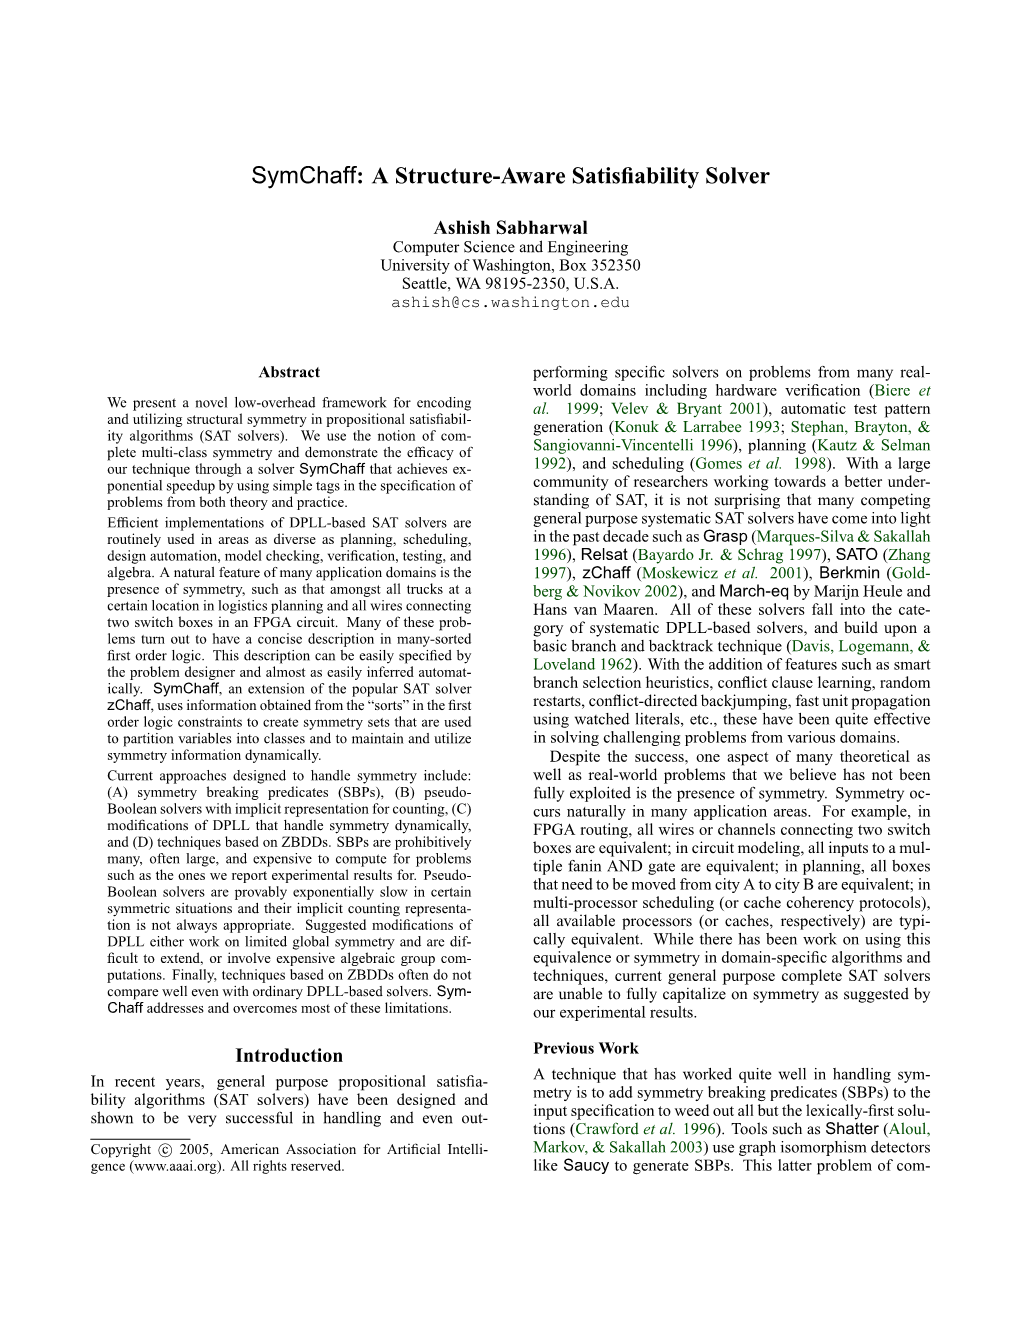 A Structure-Aware Satisfiability Solver